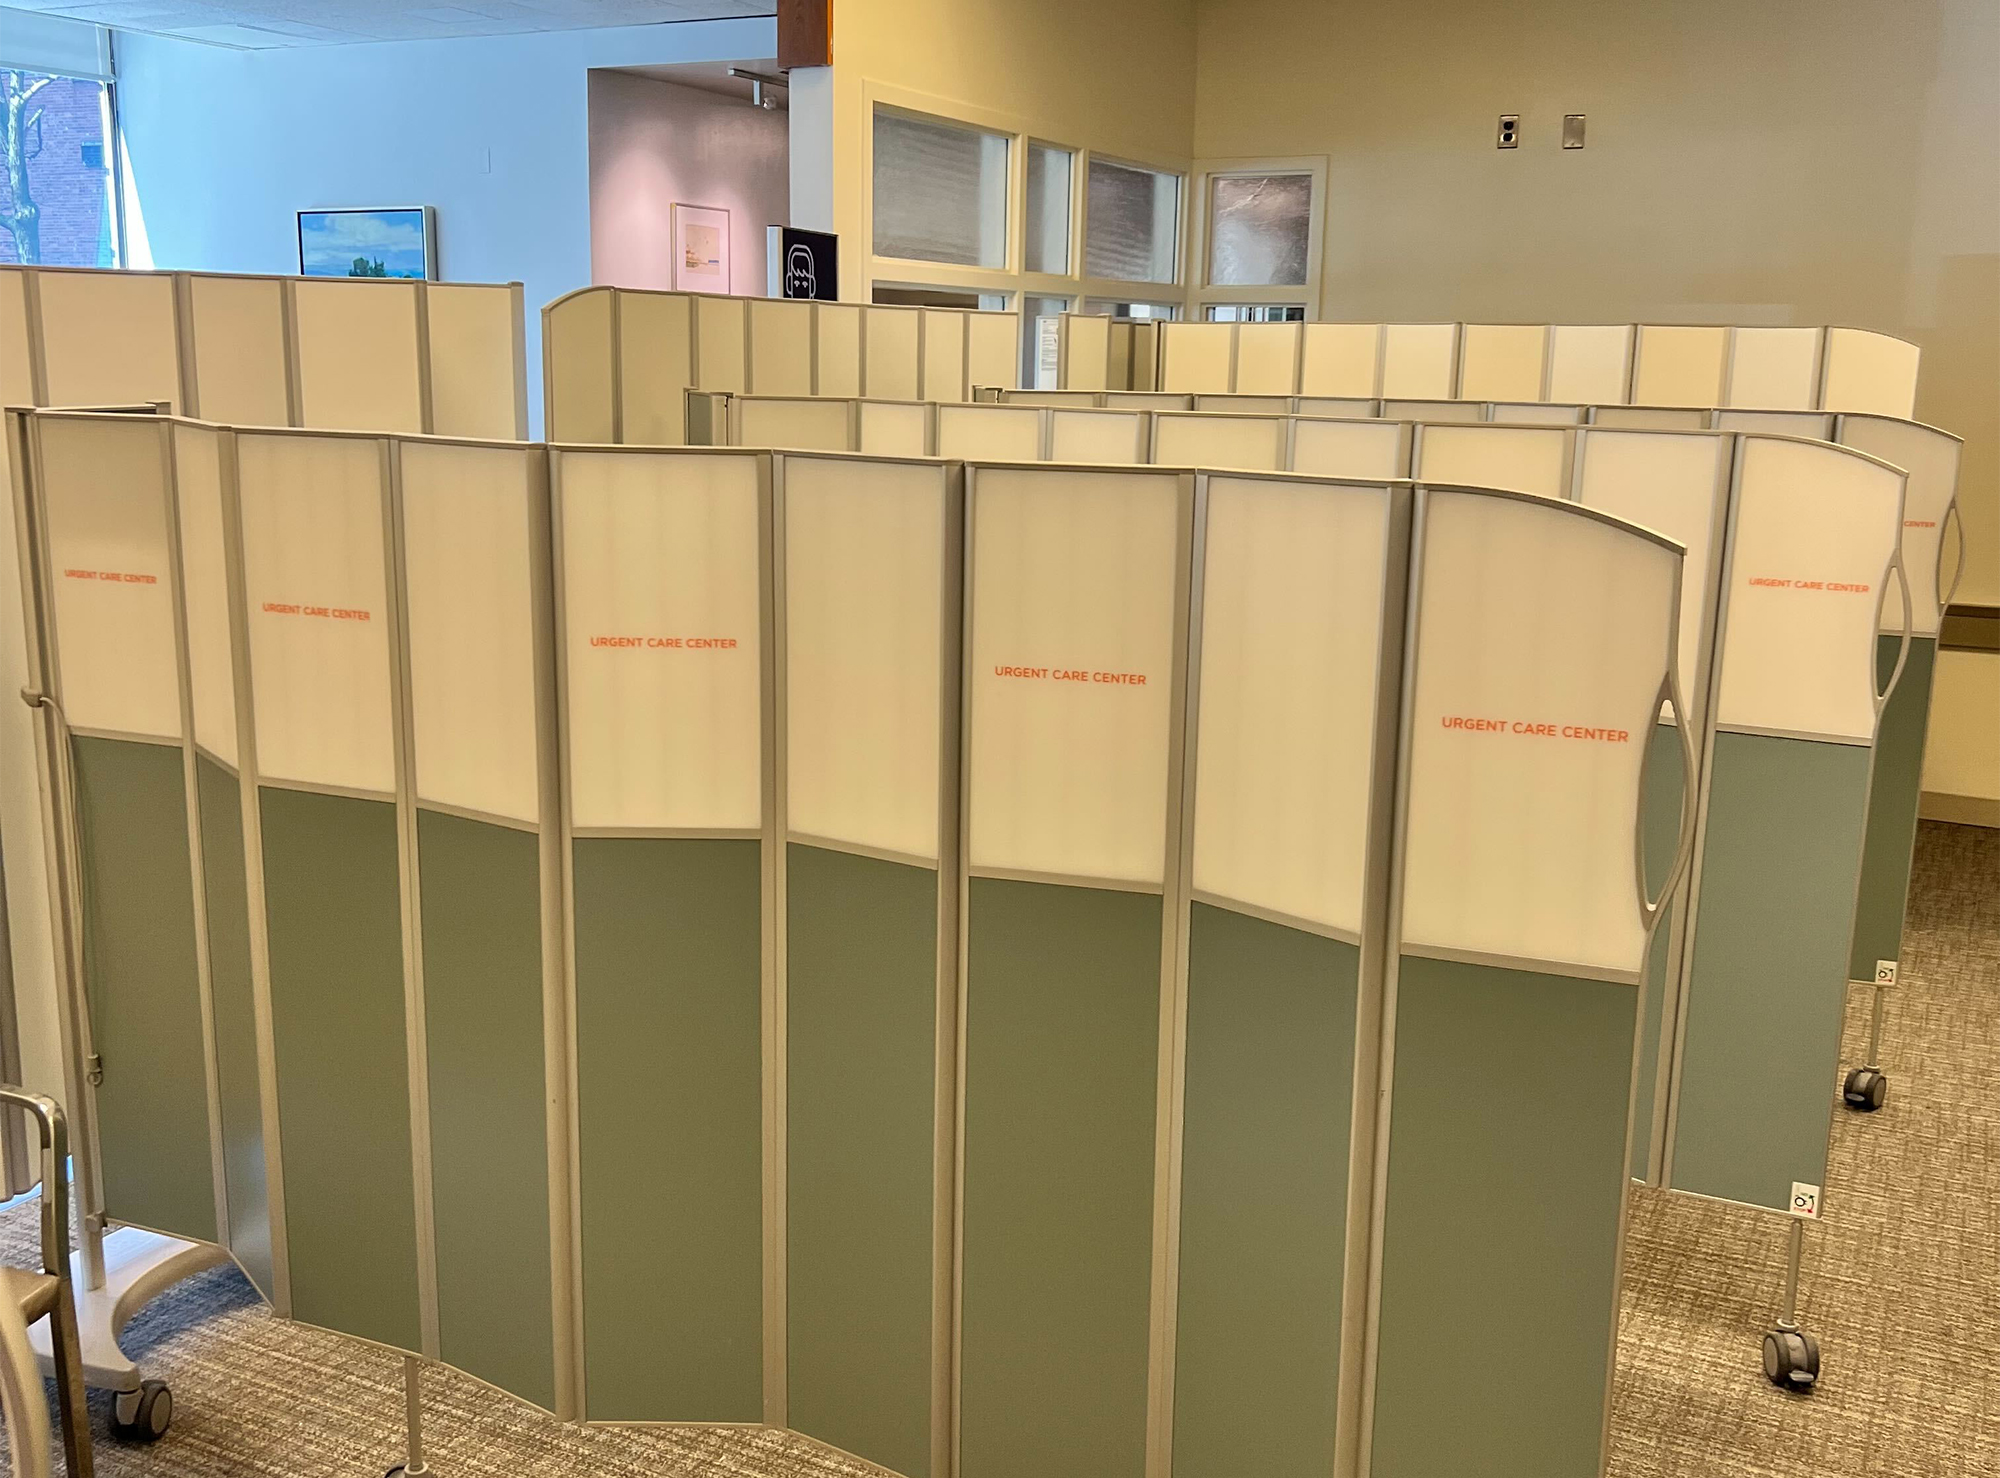 Emergency department check-in area with temporary mobile folding screens